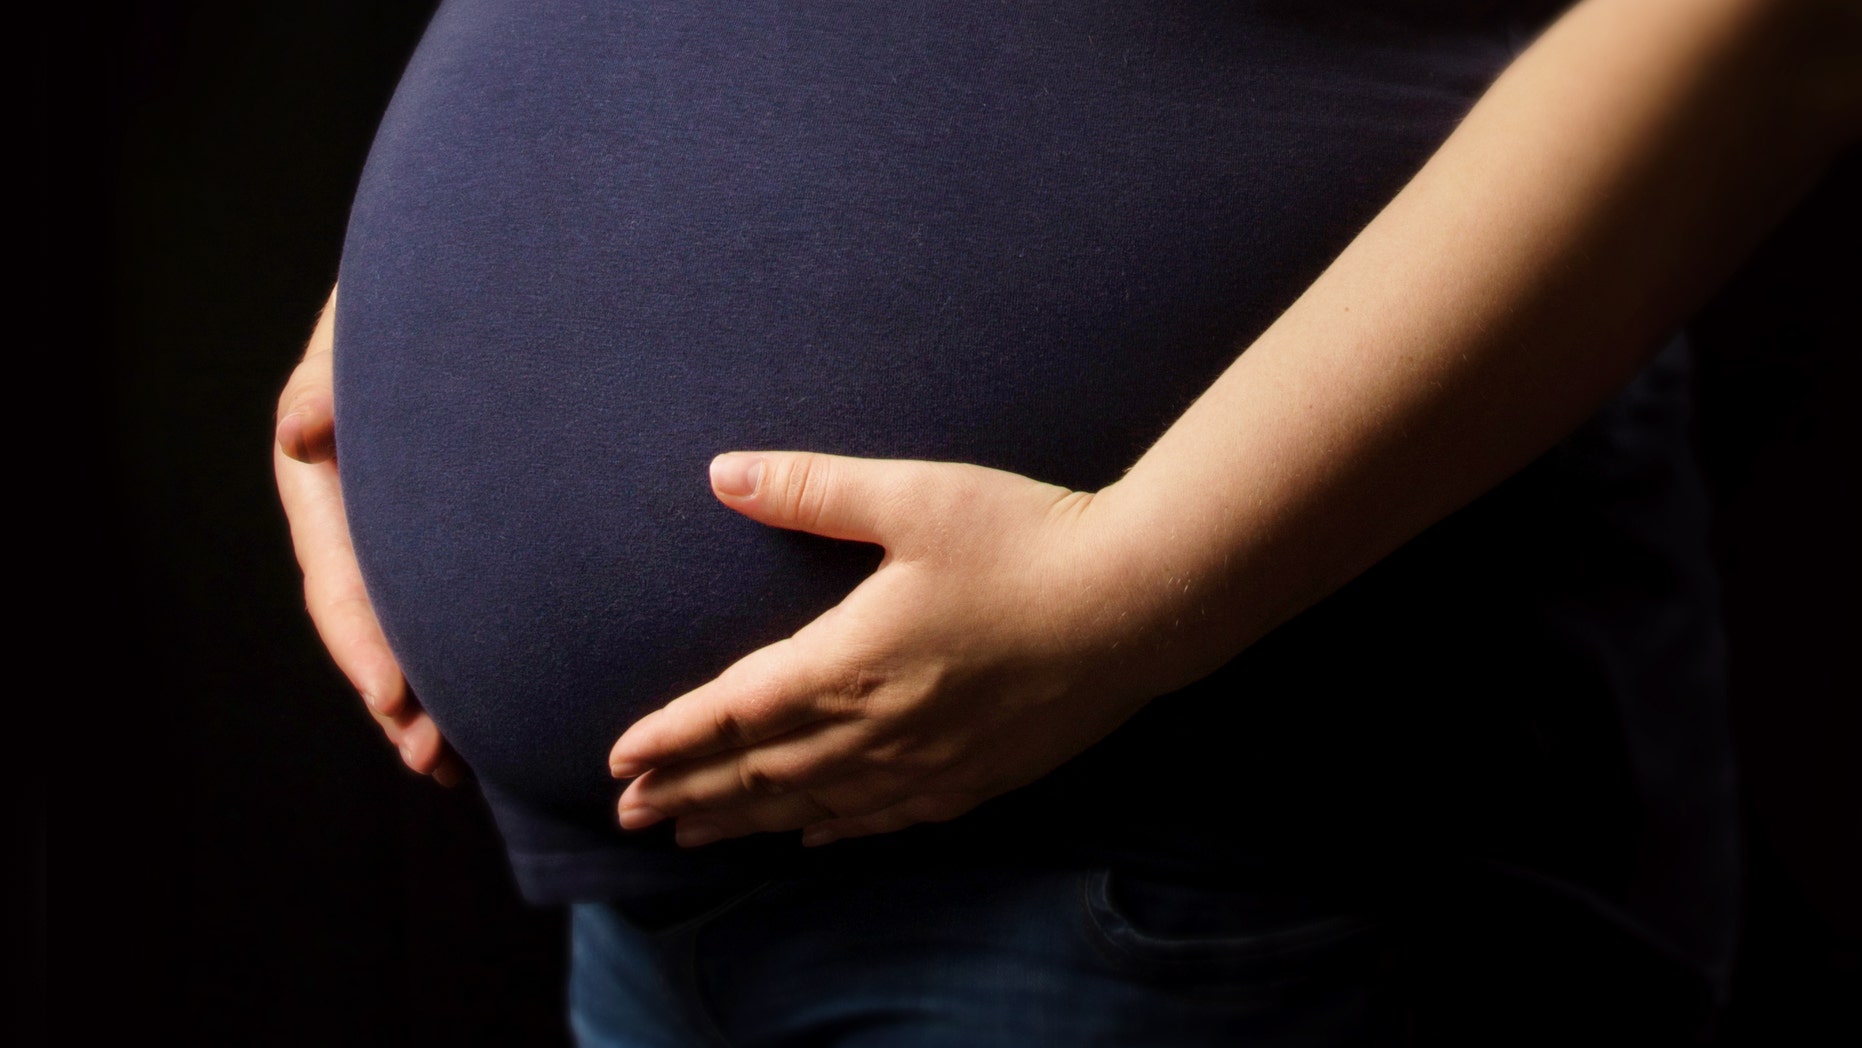 Excess Pregnancy Weight Gain Tied To Risk For Delivery